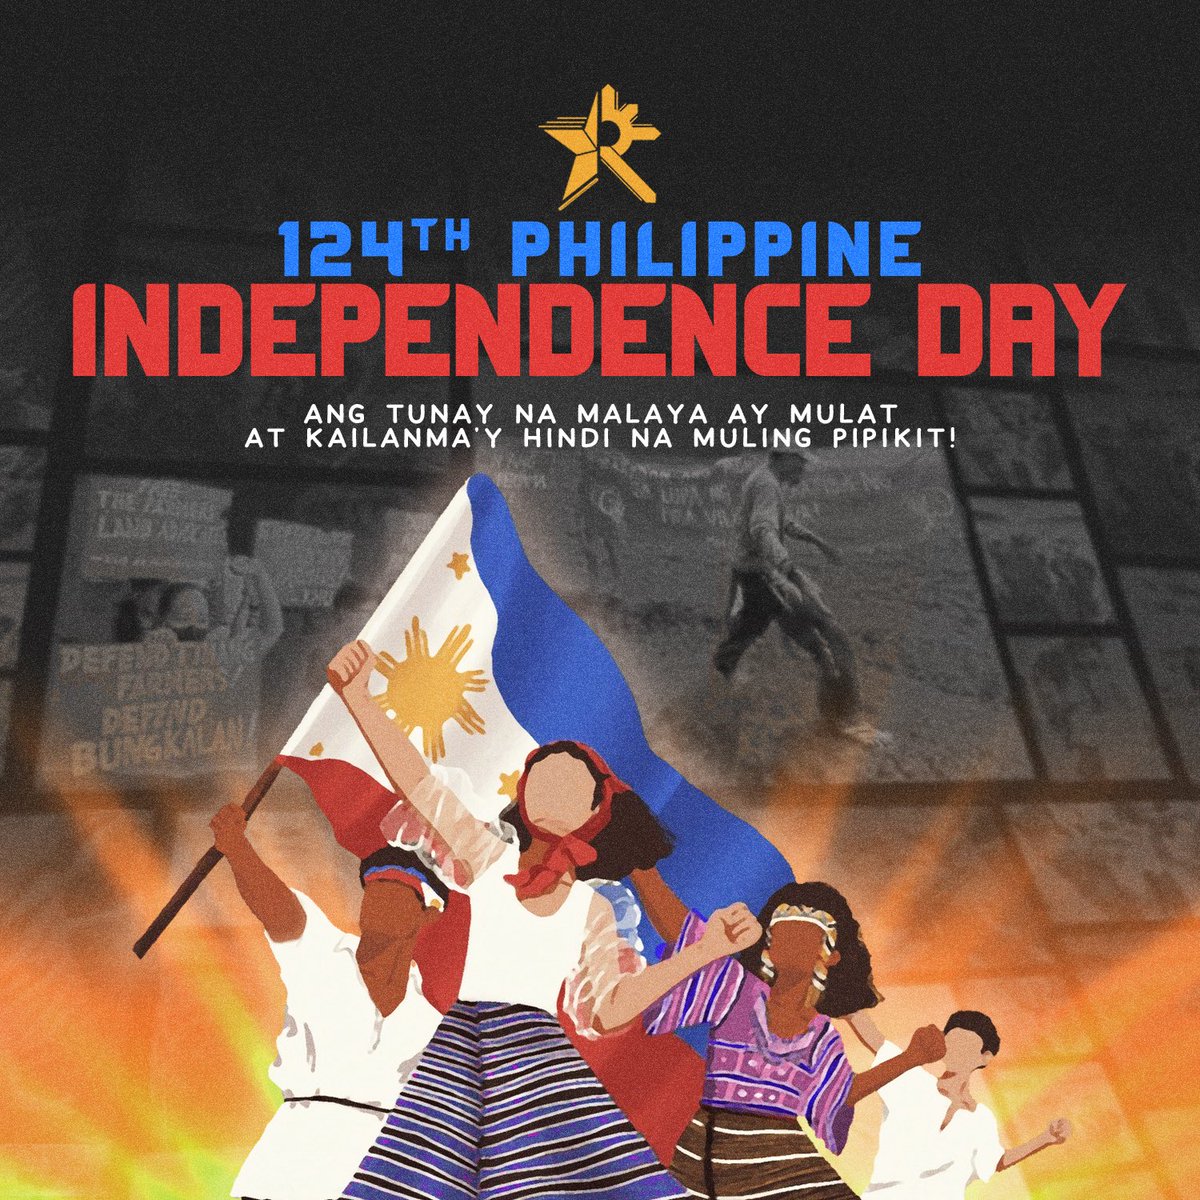 This day entails the reawakening of our nationalistic commitments. We must take the initiative to act collectively as a youth, driven to improve our country through a selfless love of truth, justice, and history.

#IndependenceDay
#AtinAngPilipinas
#FreeTinang93